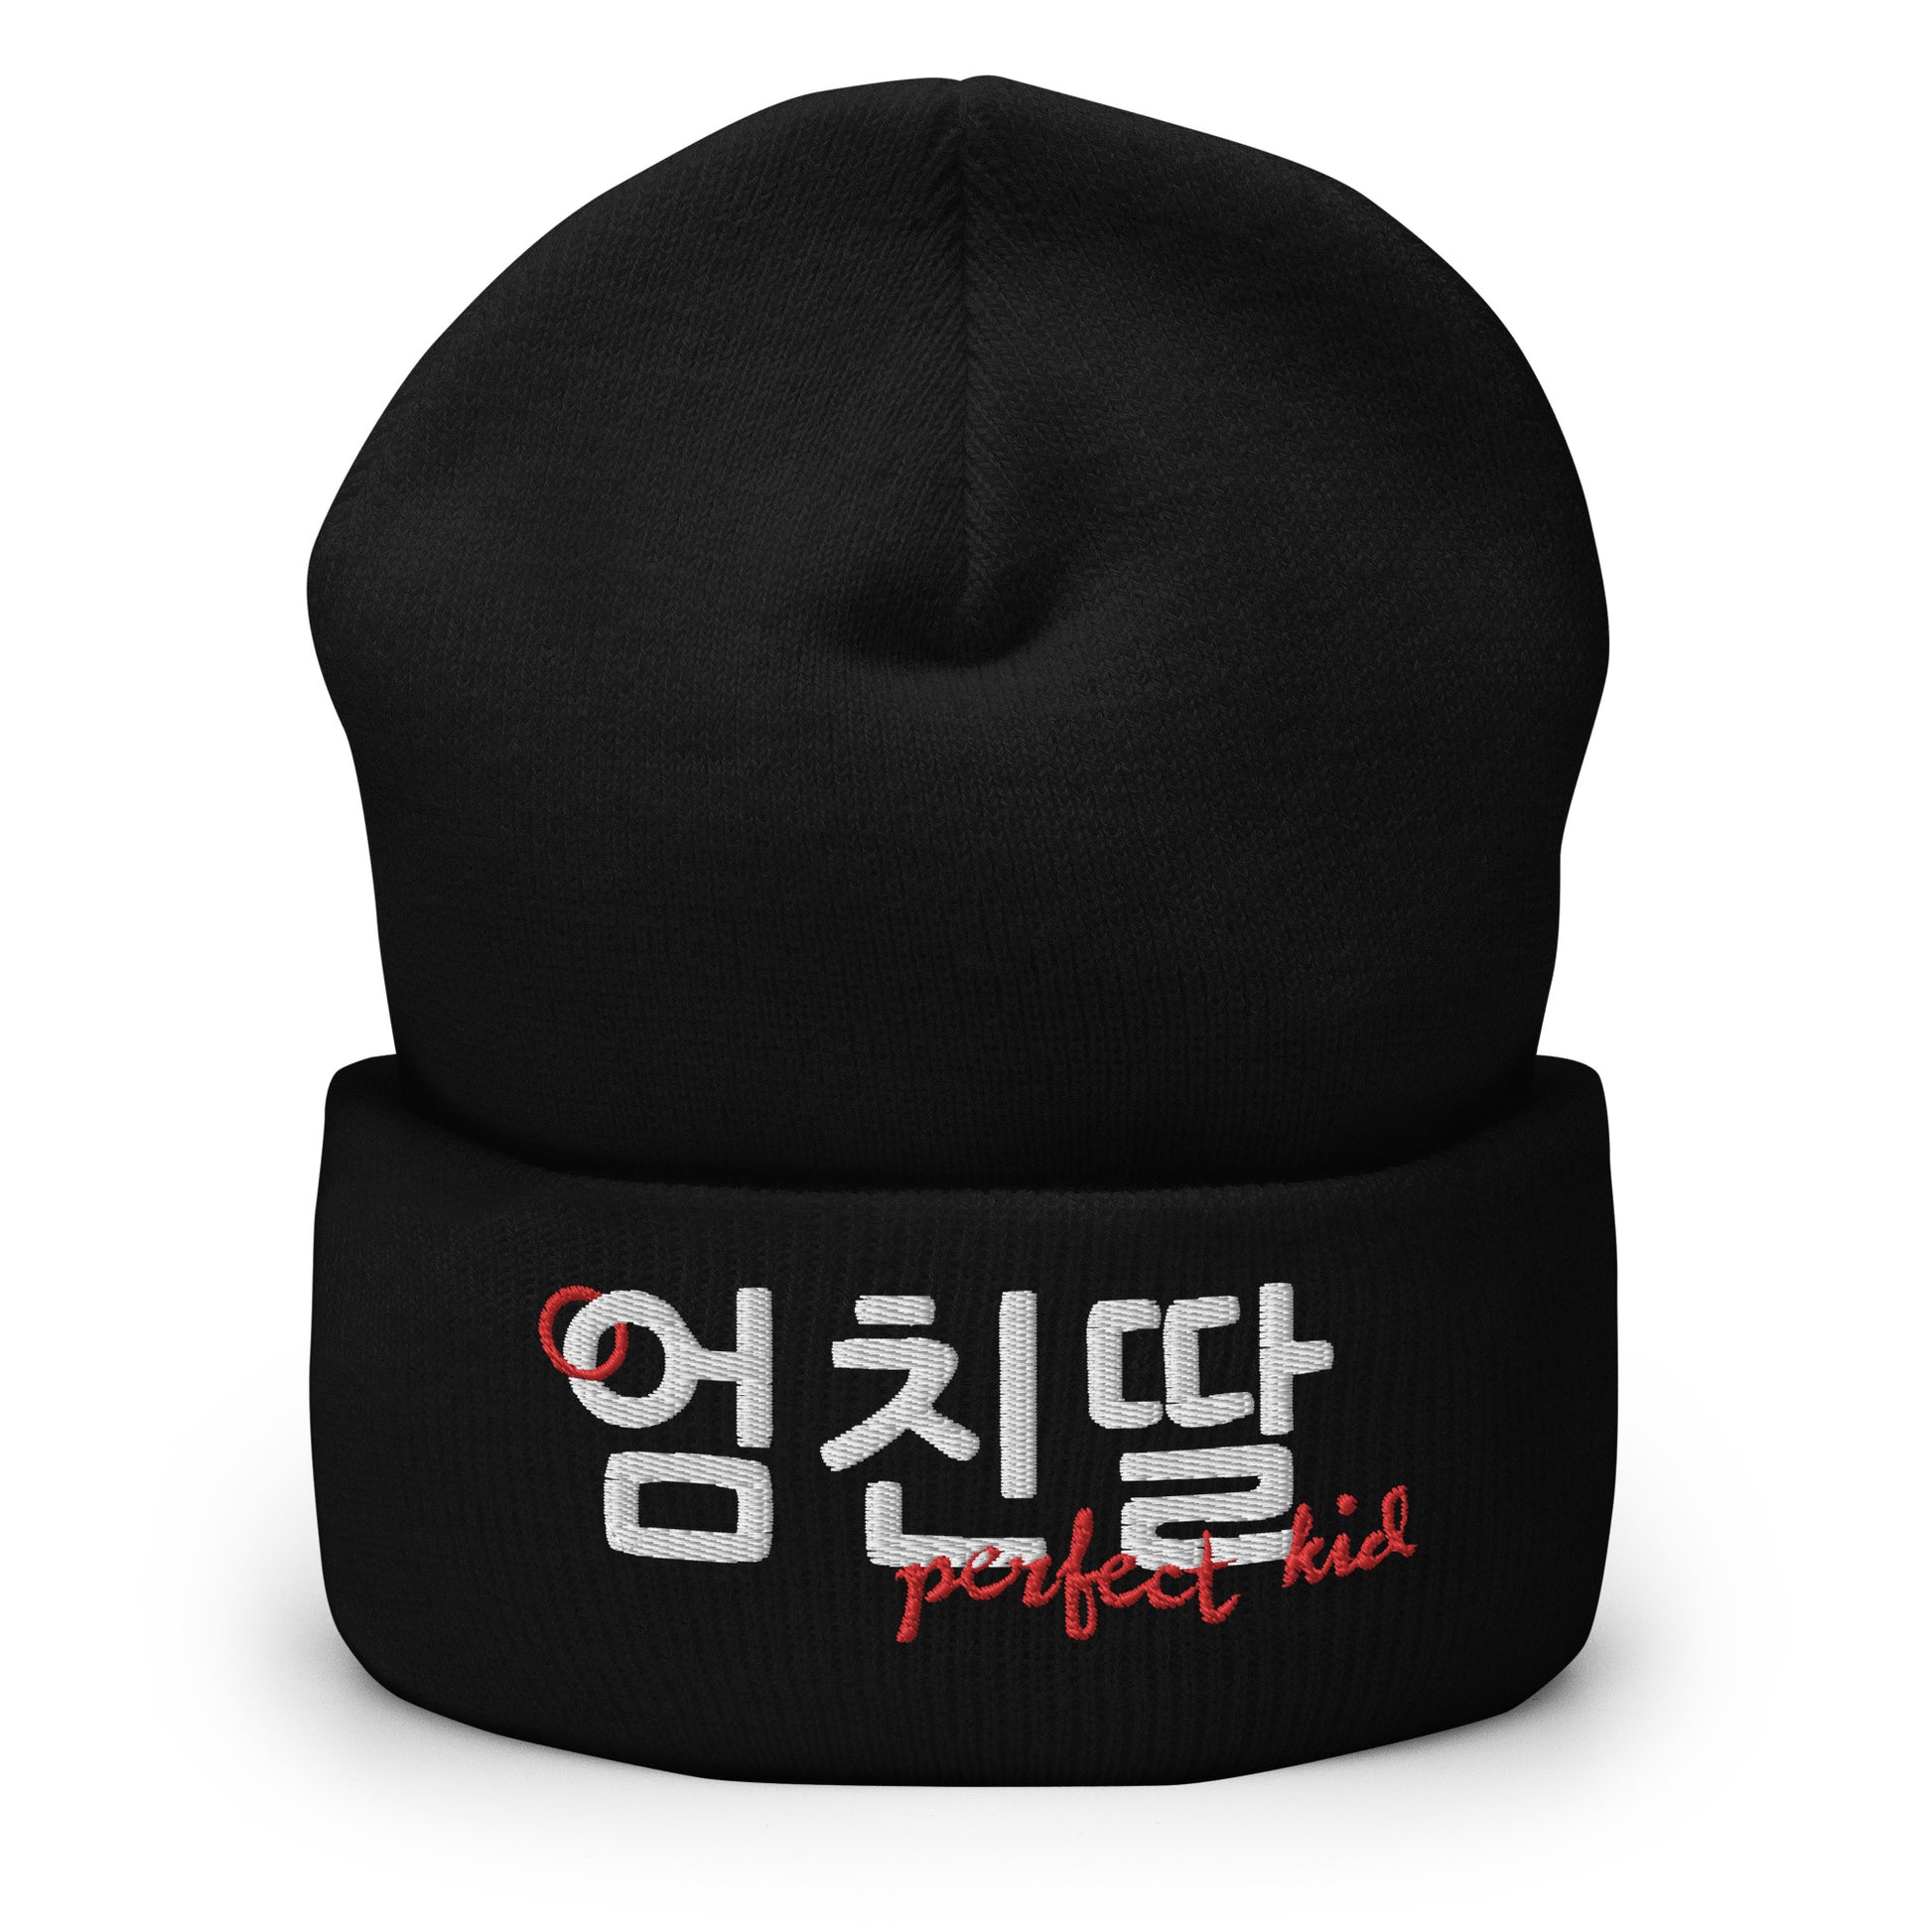 Cute, cuffed black beanie with the Hangul expression to describe a perfect child (female) embroidered on the front